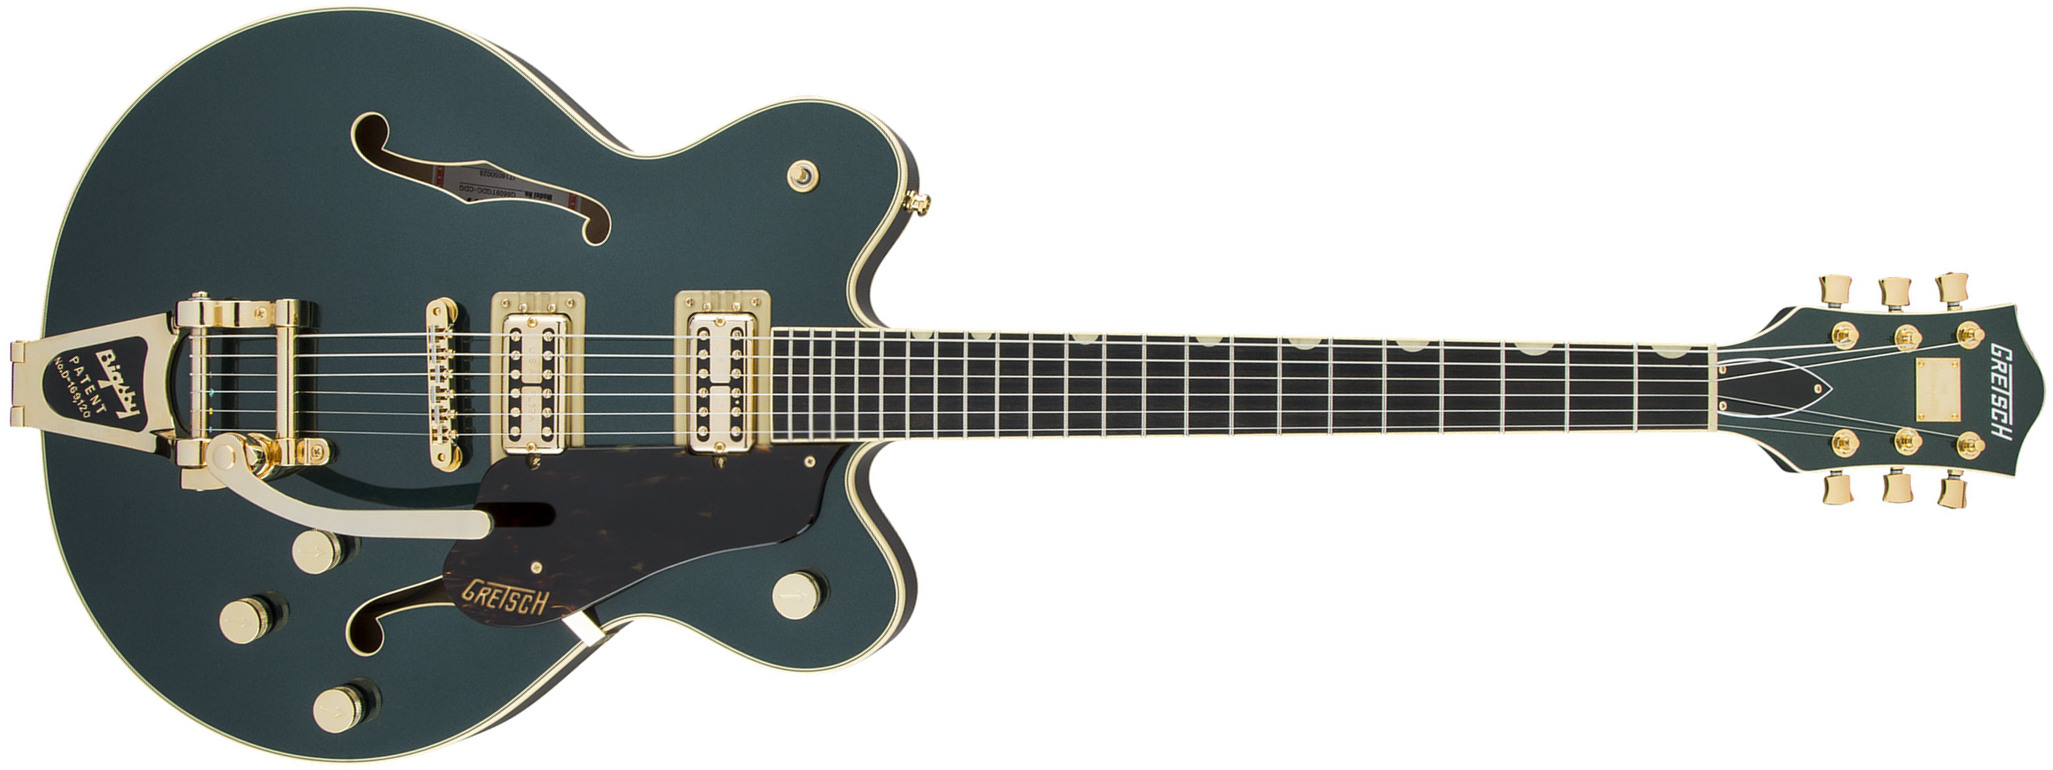 Gretsch G6609tg Broadkaster Center Block Dc Bigsby Gh Jap 2h Trem Eb - Cadillac Green - Guitare Électrique 1/2 Caisse - Main picture